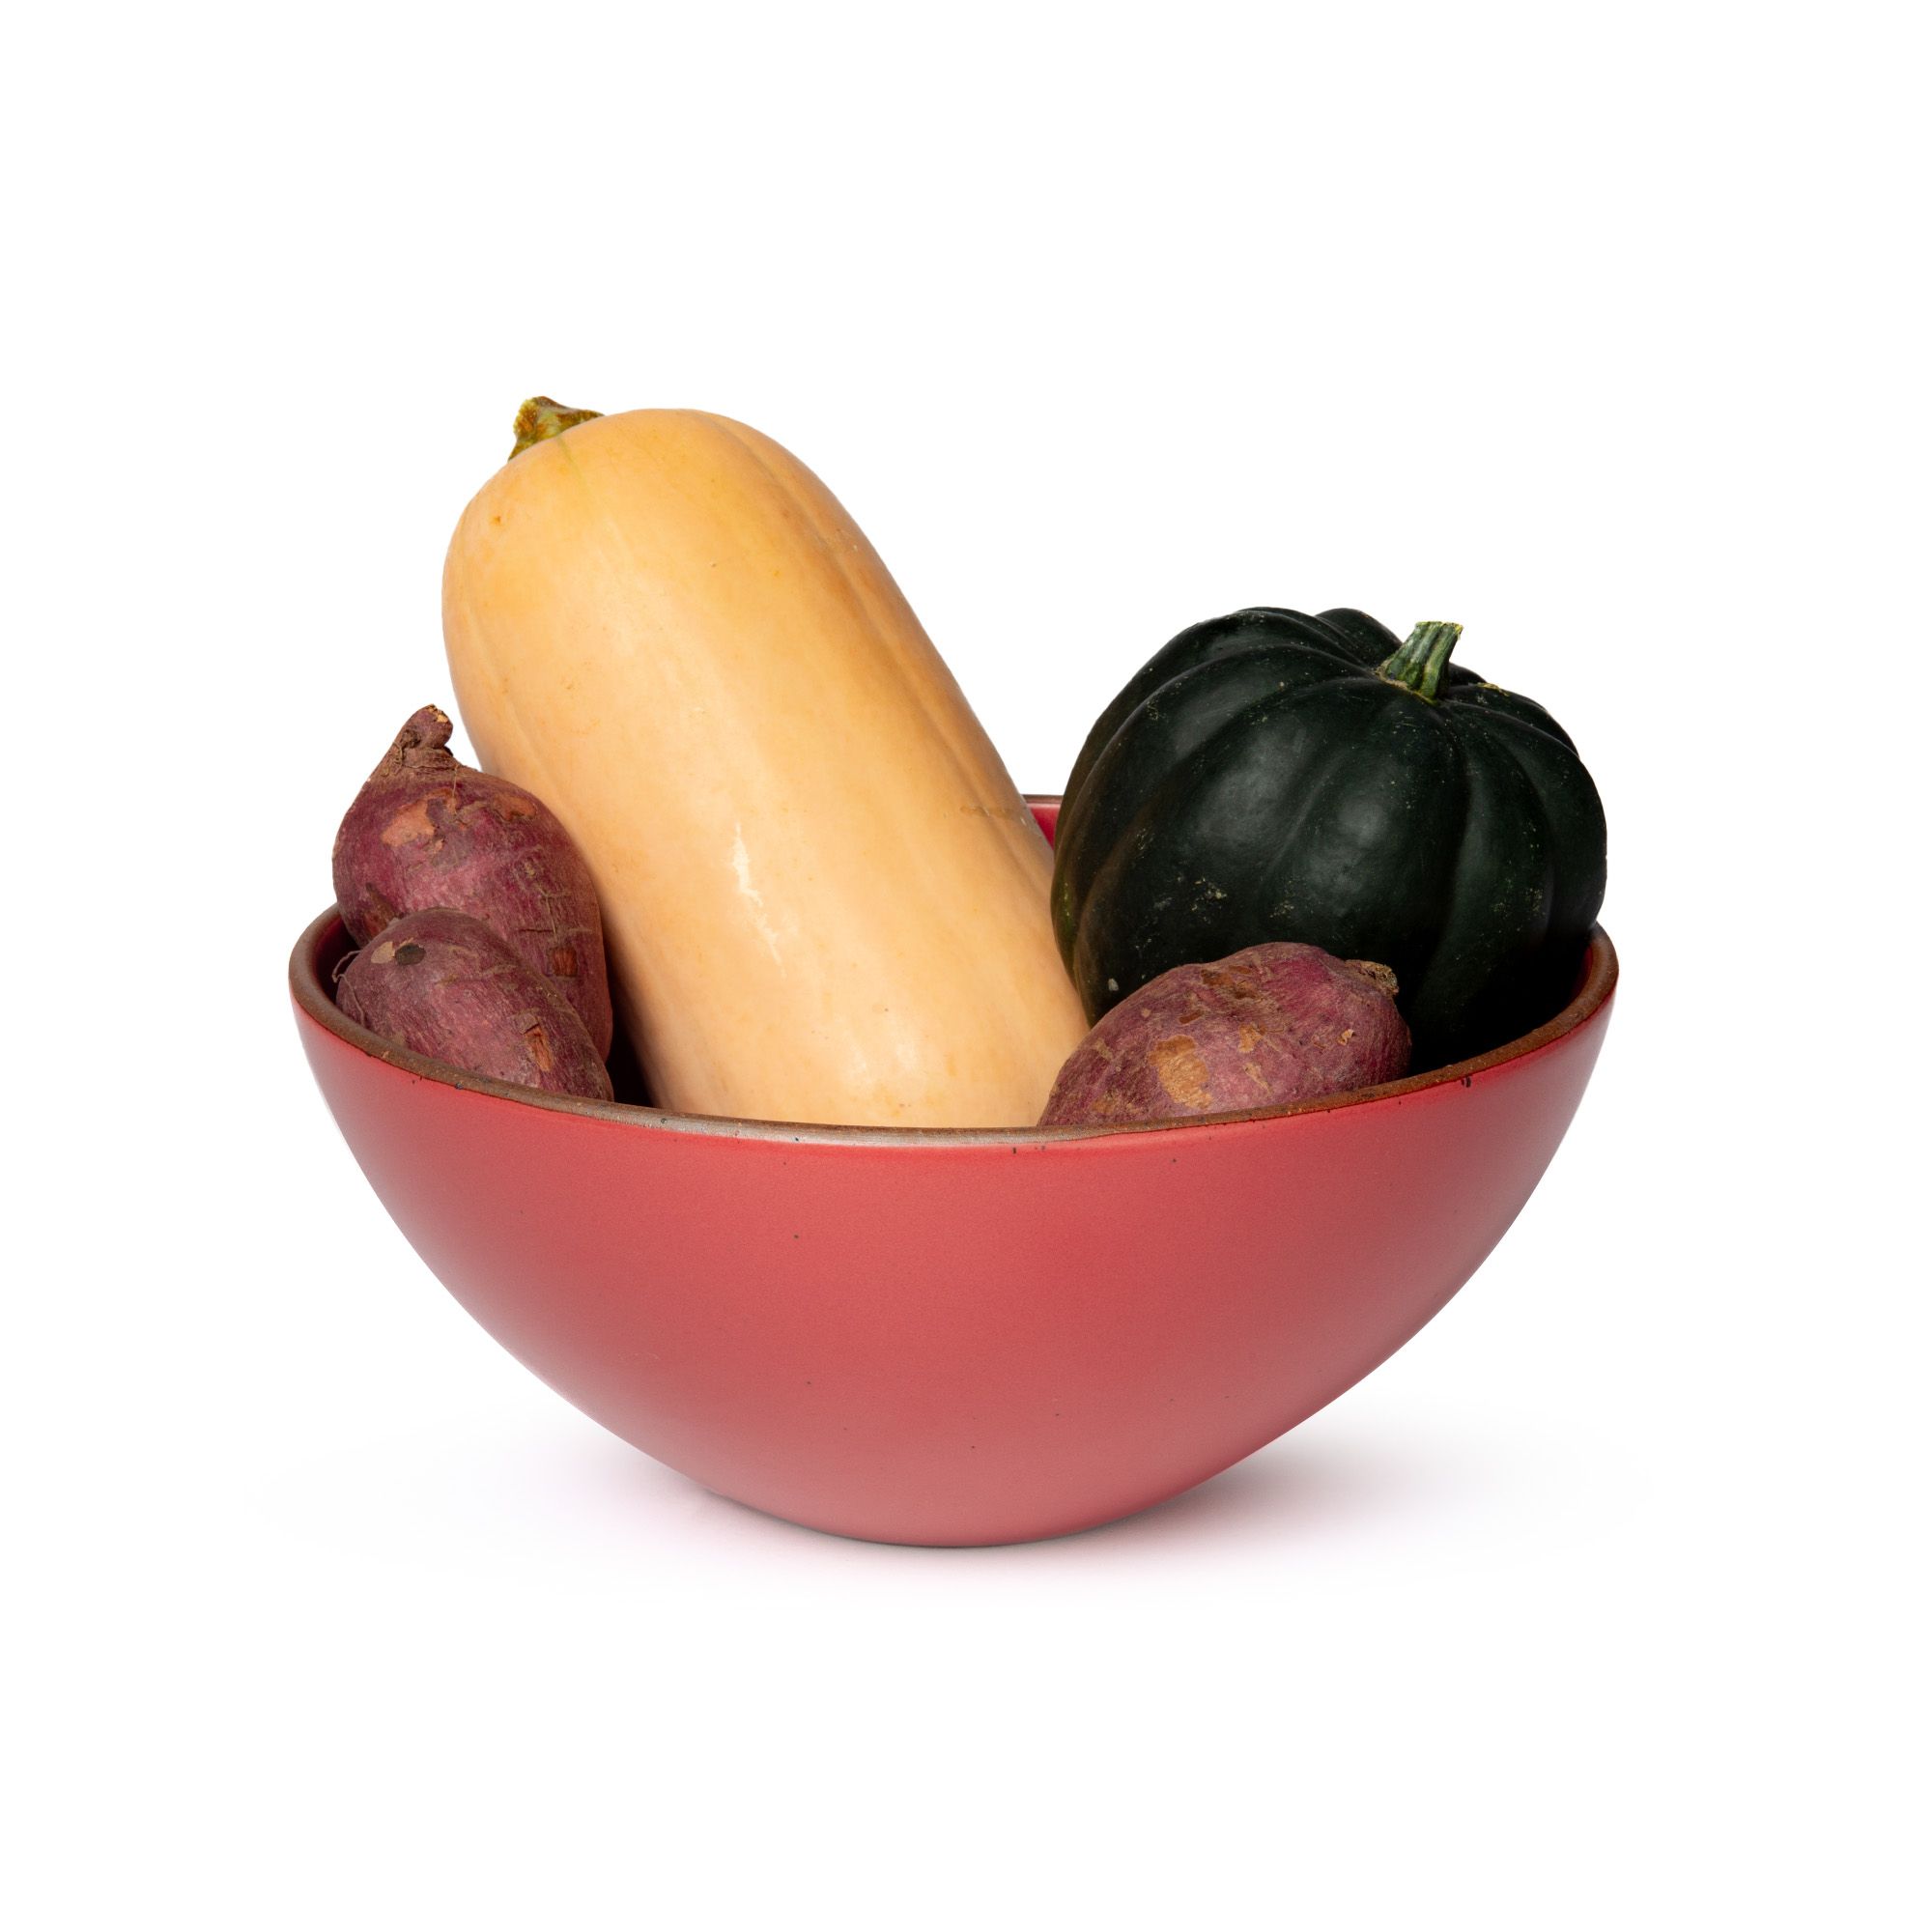 A large ceramic mixing bowl in a bold red color featuring iron speckles and an unglazed rim, filled with sweet potatoes and gourds.